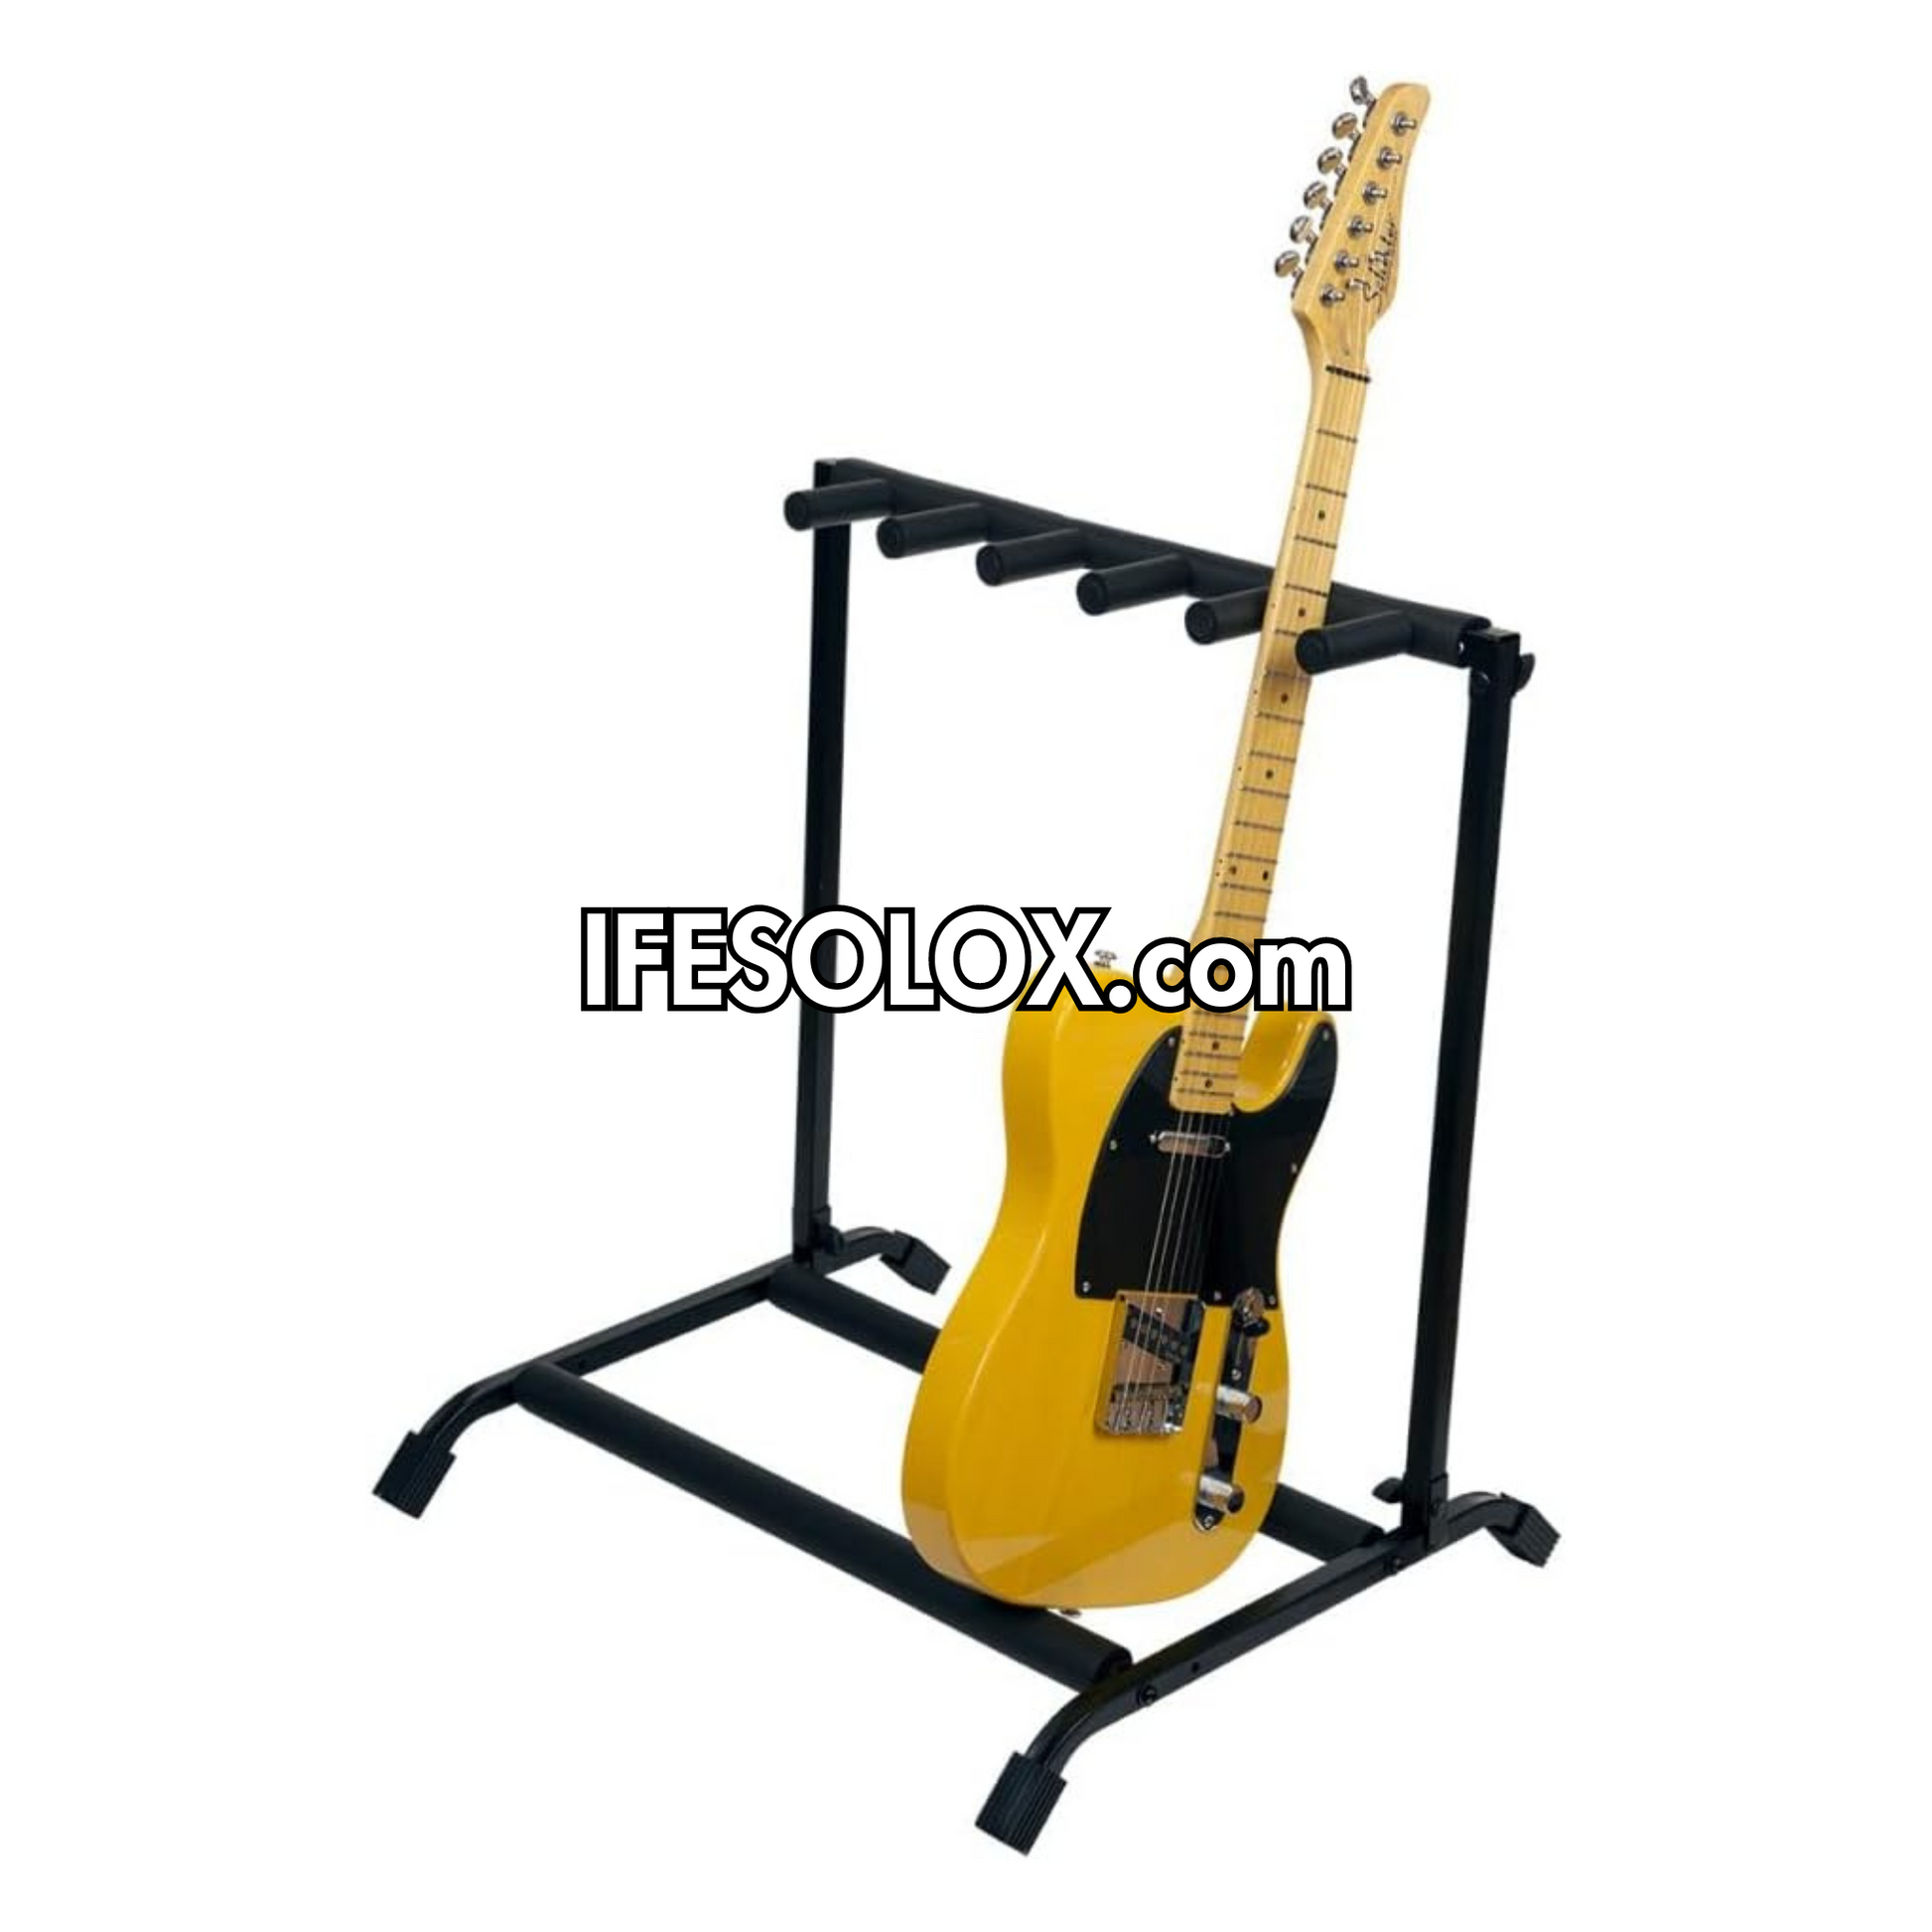 SLX Foldable Multi-Guitar Stand Rack For 5 Guitars (Acoustic, Bass or Electric) - Brand New